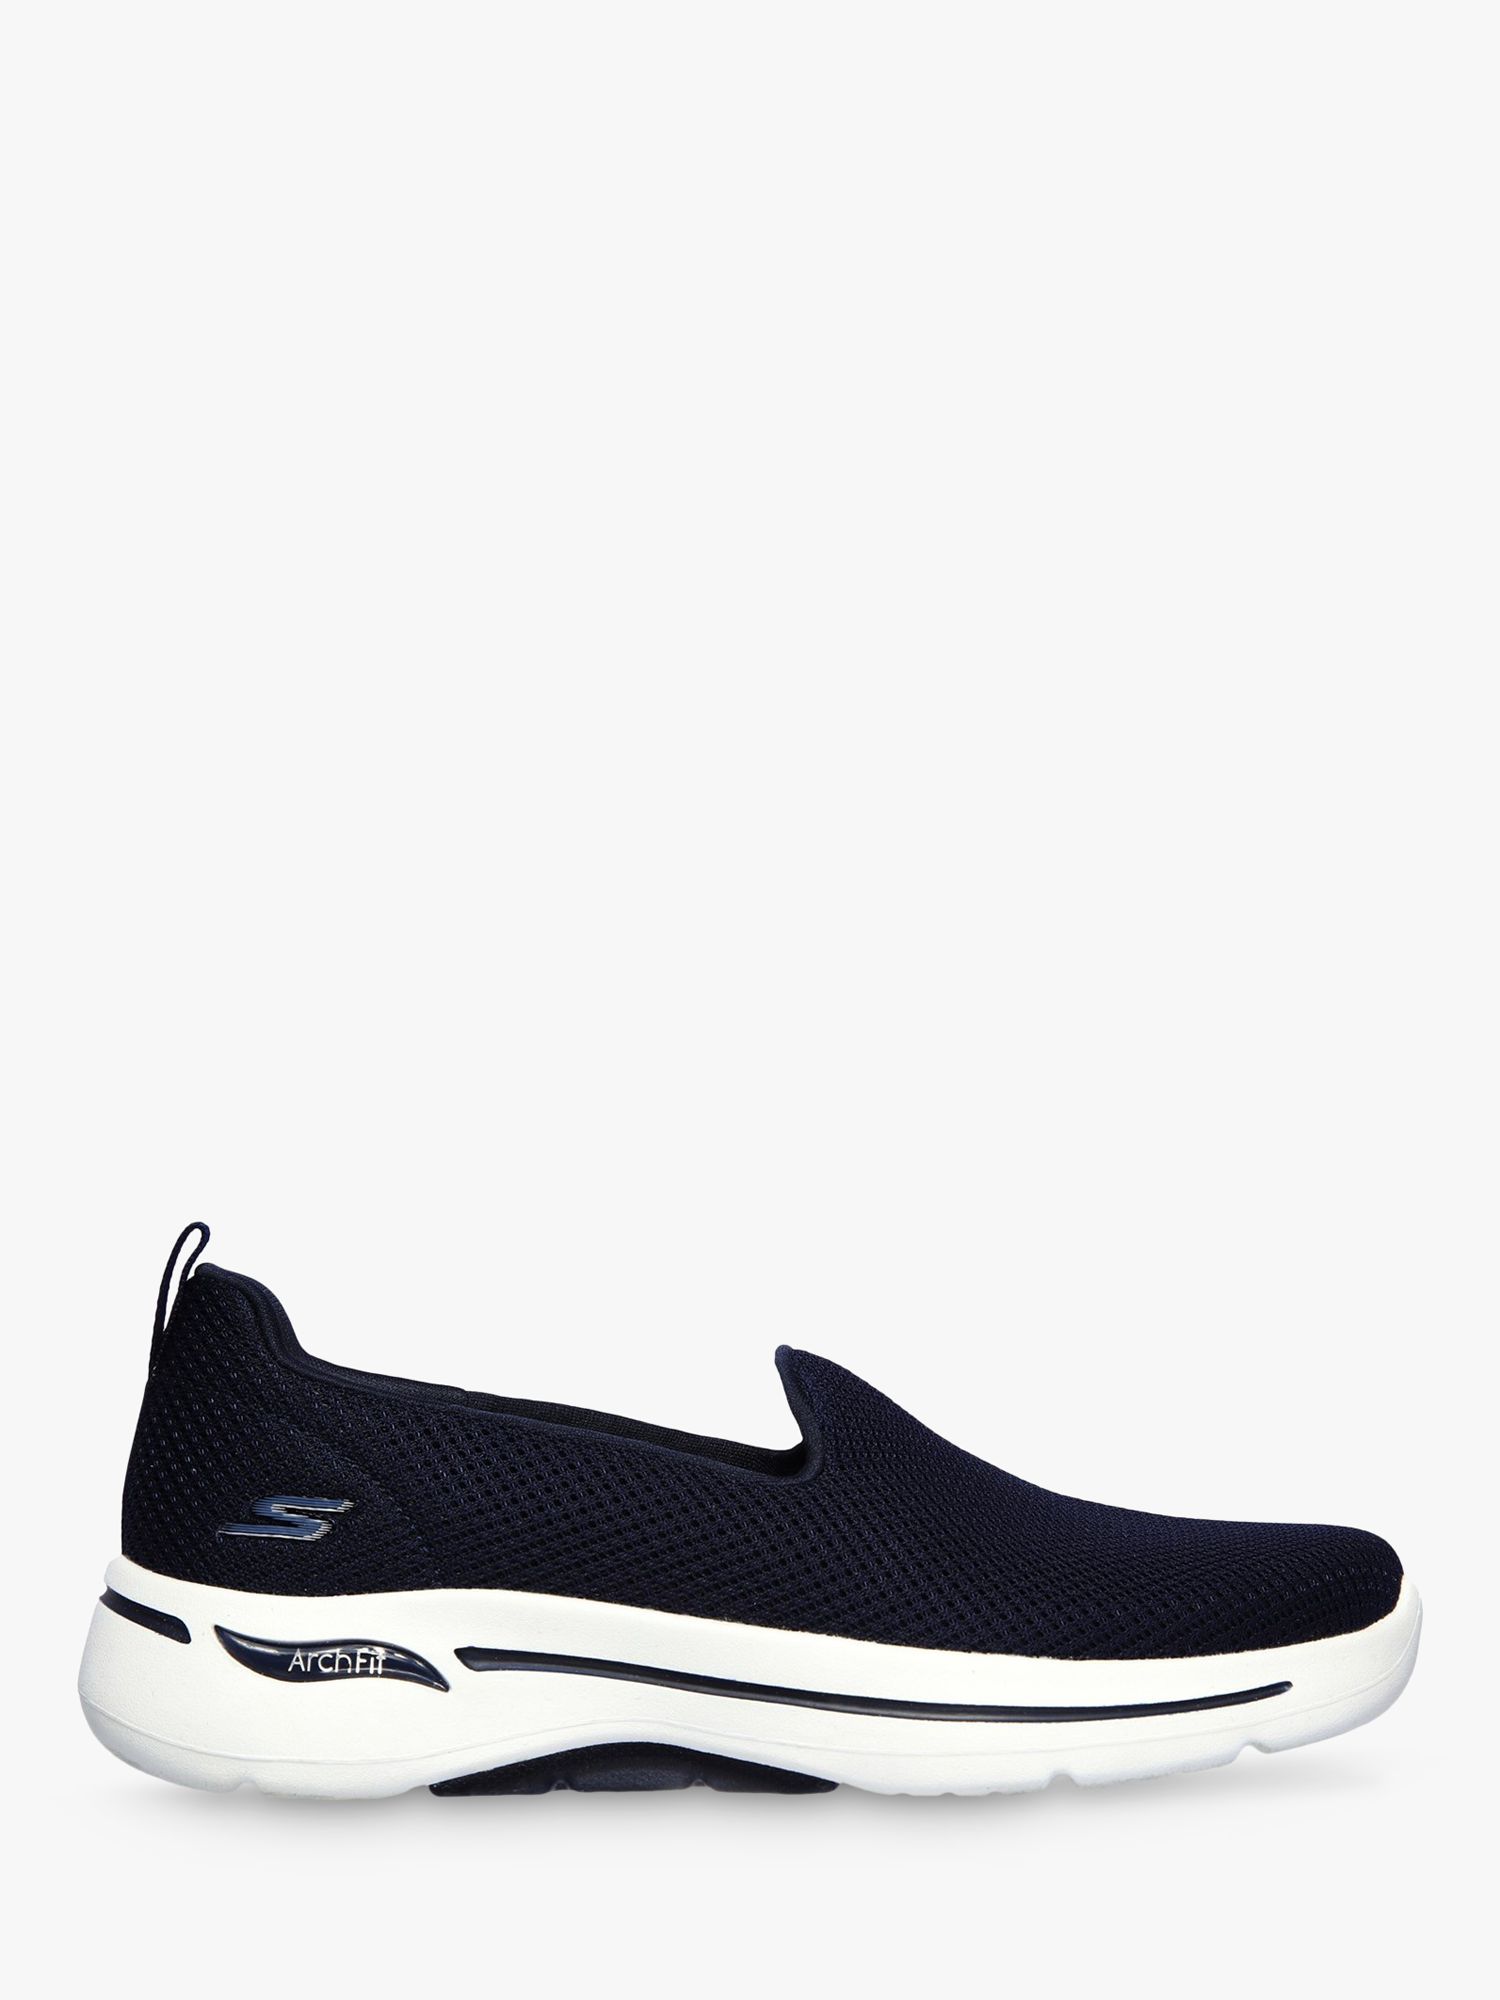 Skechers Go Walk Arch Fit Slip On Trainers, Navy